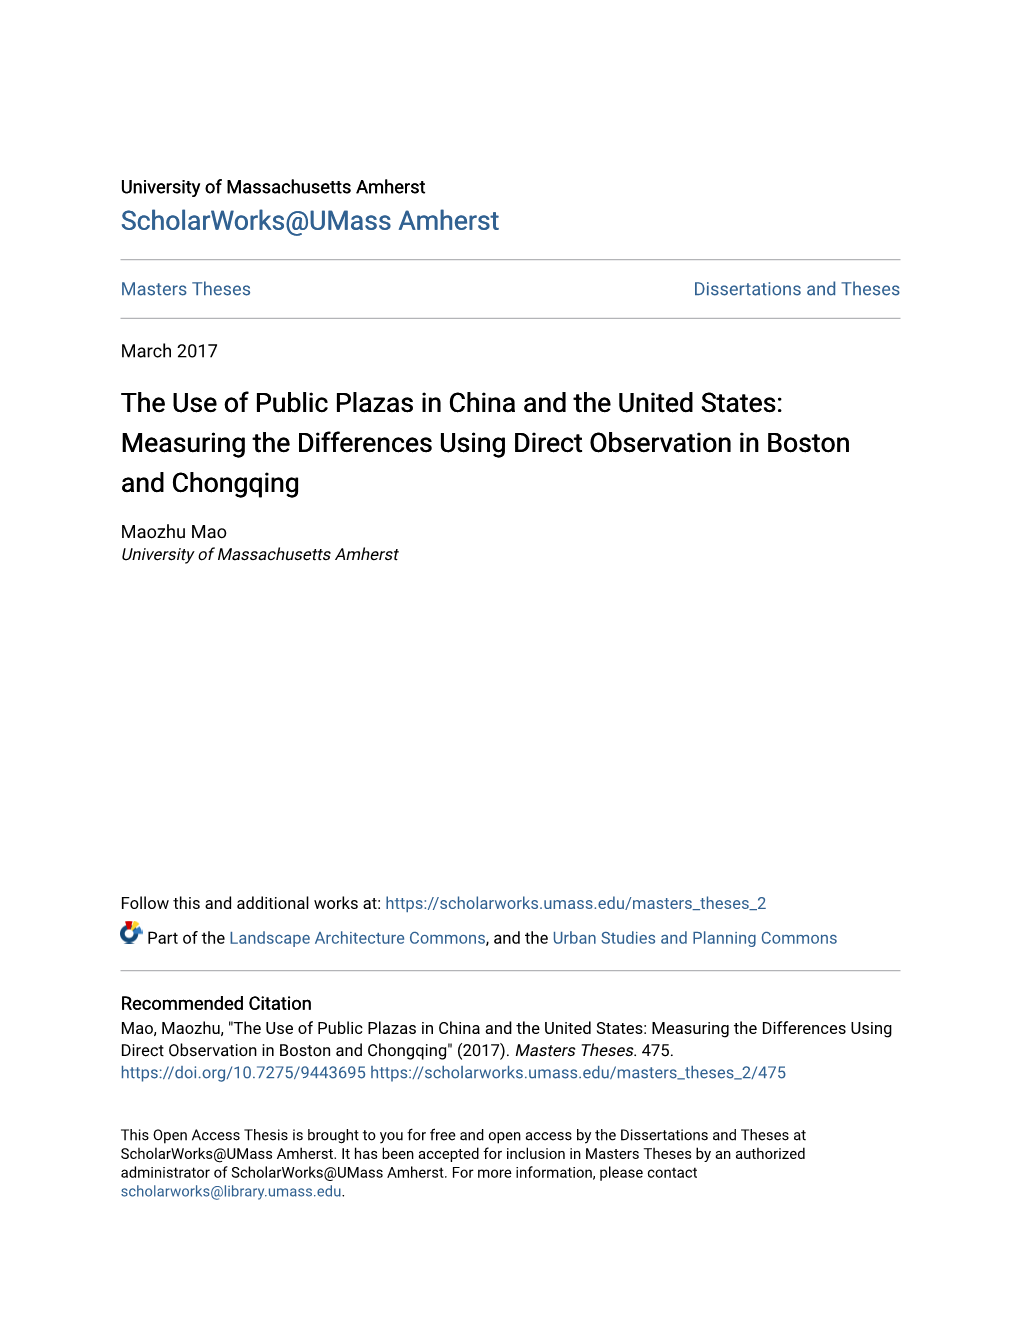 The Use of Public Plazas in China and the United States: Measuring the Differences Using Direct Observation in Boston and Chongqing